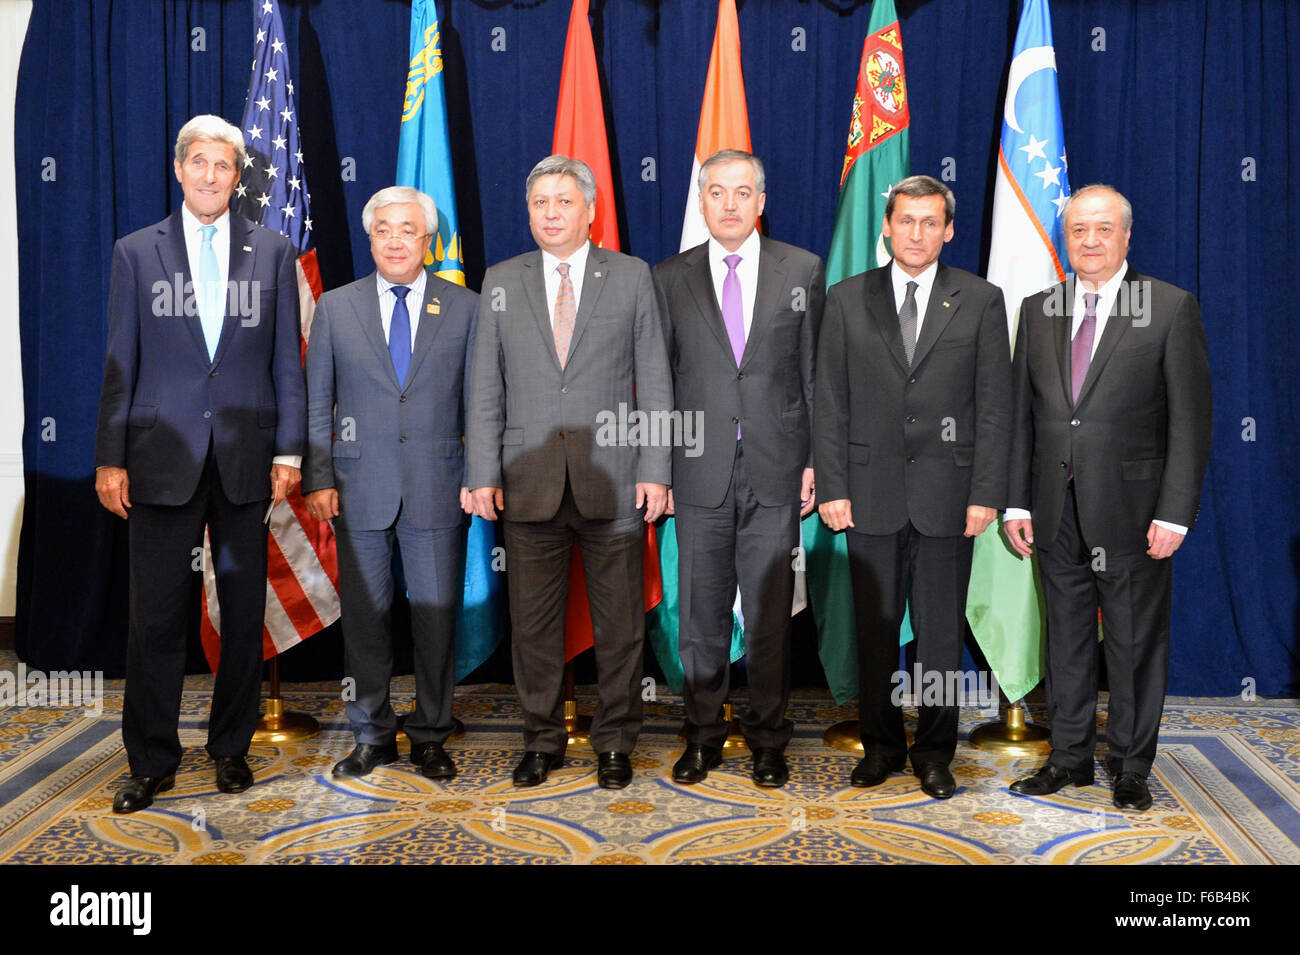 Secretary Kerry Meets With the Five Central Asian Foreign Ministers in New York City Stock Photo